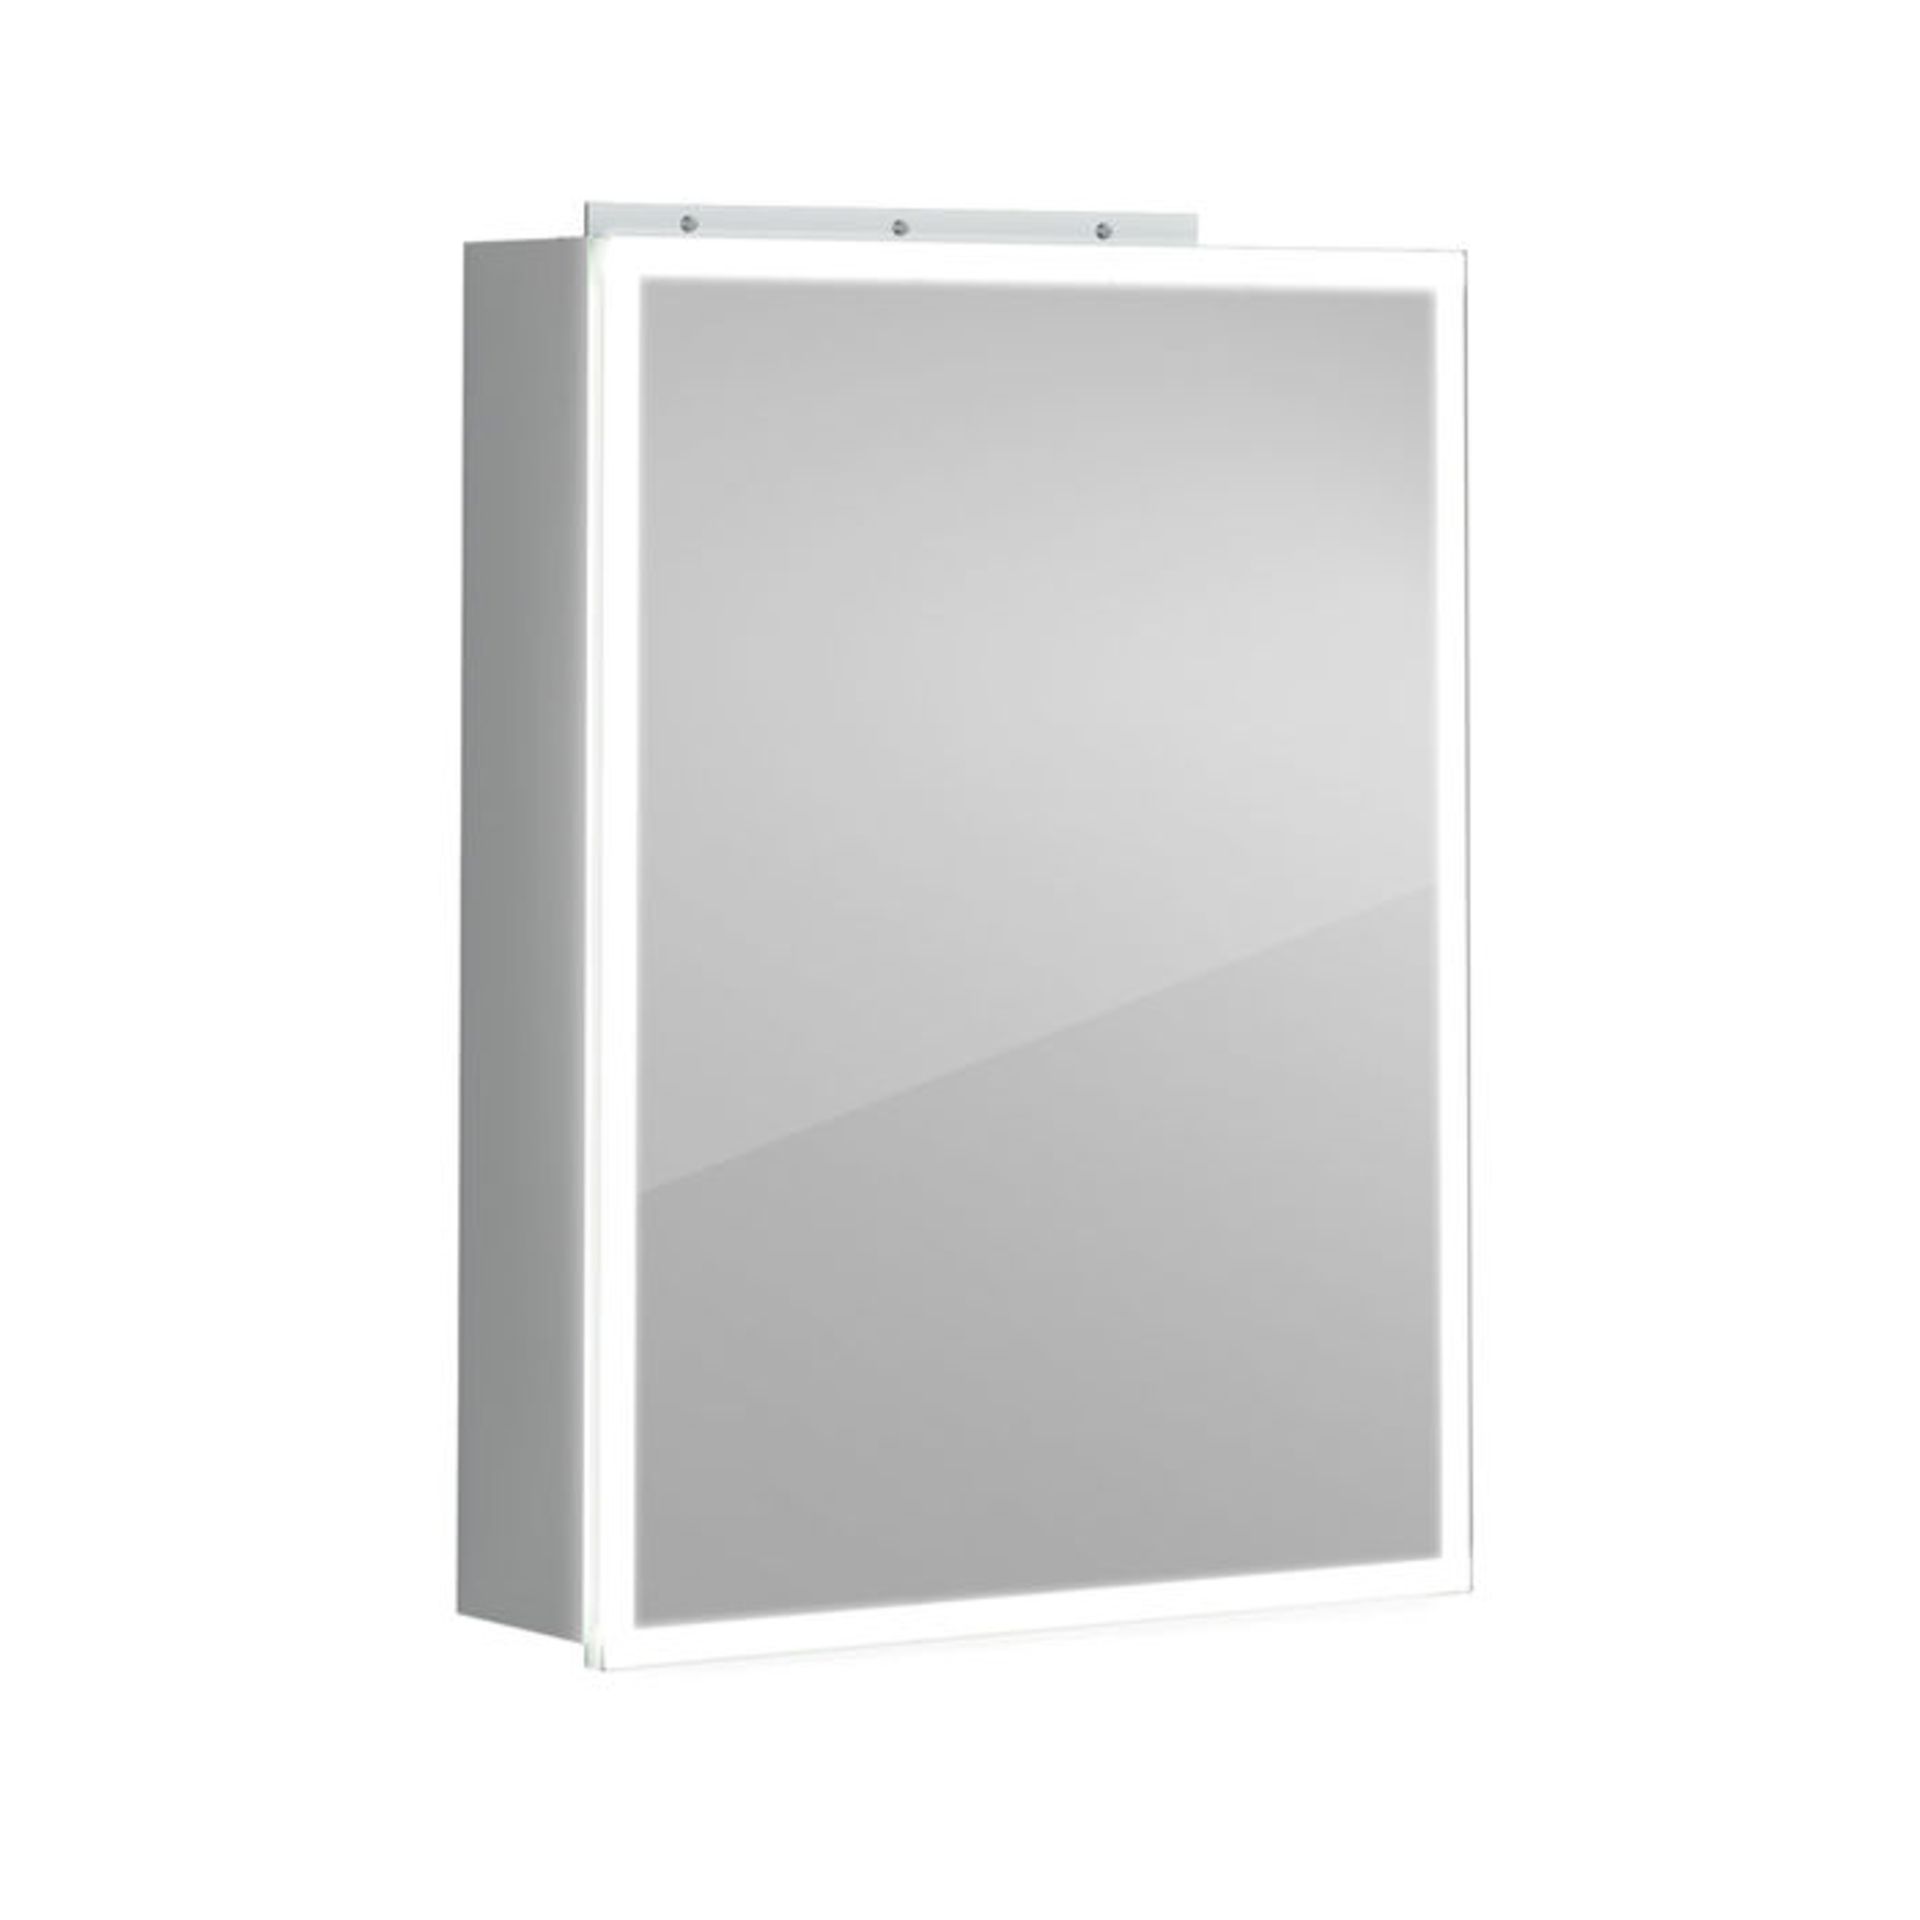 (QP176) 450x600 Cosmic Illuminated LED Mirror Cabinet. RRP £574.99. We love this mirror(QP176) - Image 4 of 4